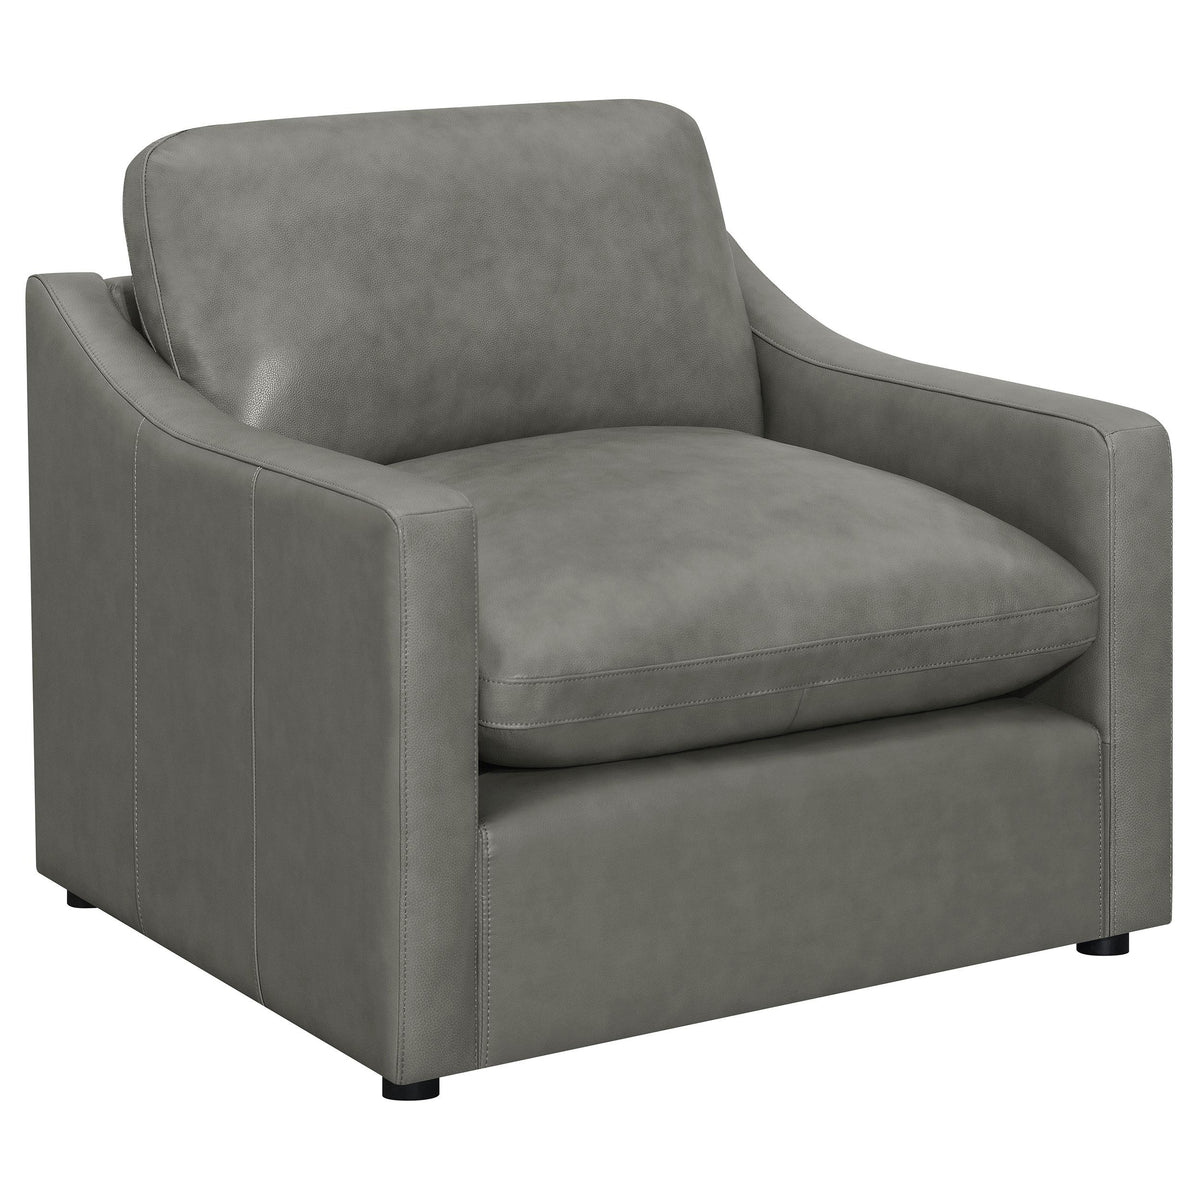 Grayson Sloped Arm Upholstered Chair Grey Grayson Sloped Arm Upholstered Chair Grey Half Price Furniture